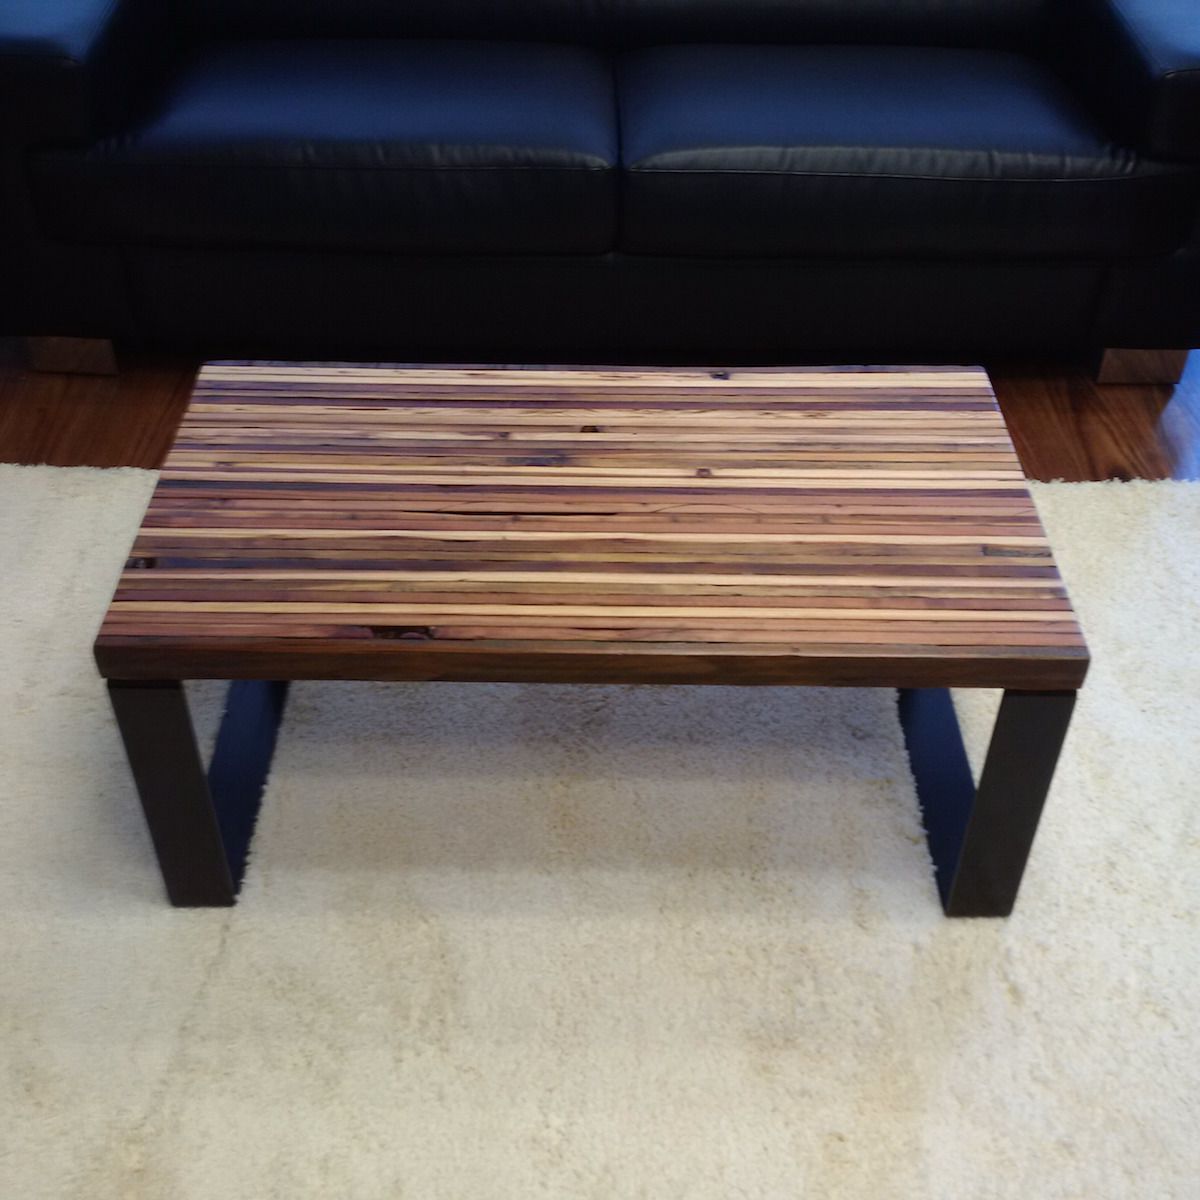 Buy A Custom Reclaimed Barn Wood Coffee Table, Made To Intended For Fashionable Barnwood Coffee Tables (View 18 of 20)